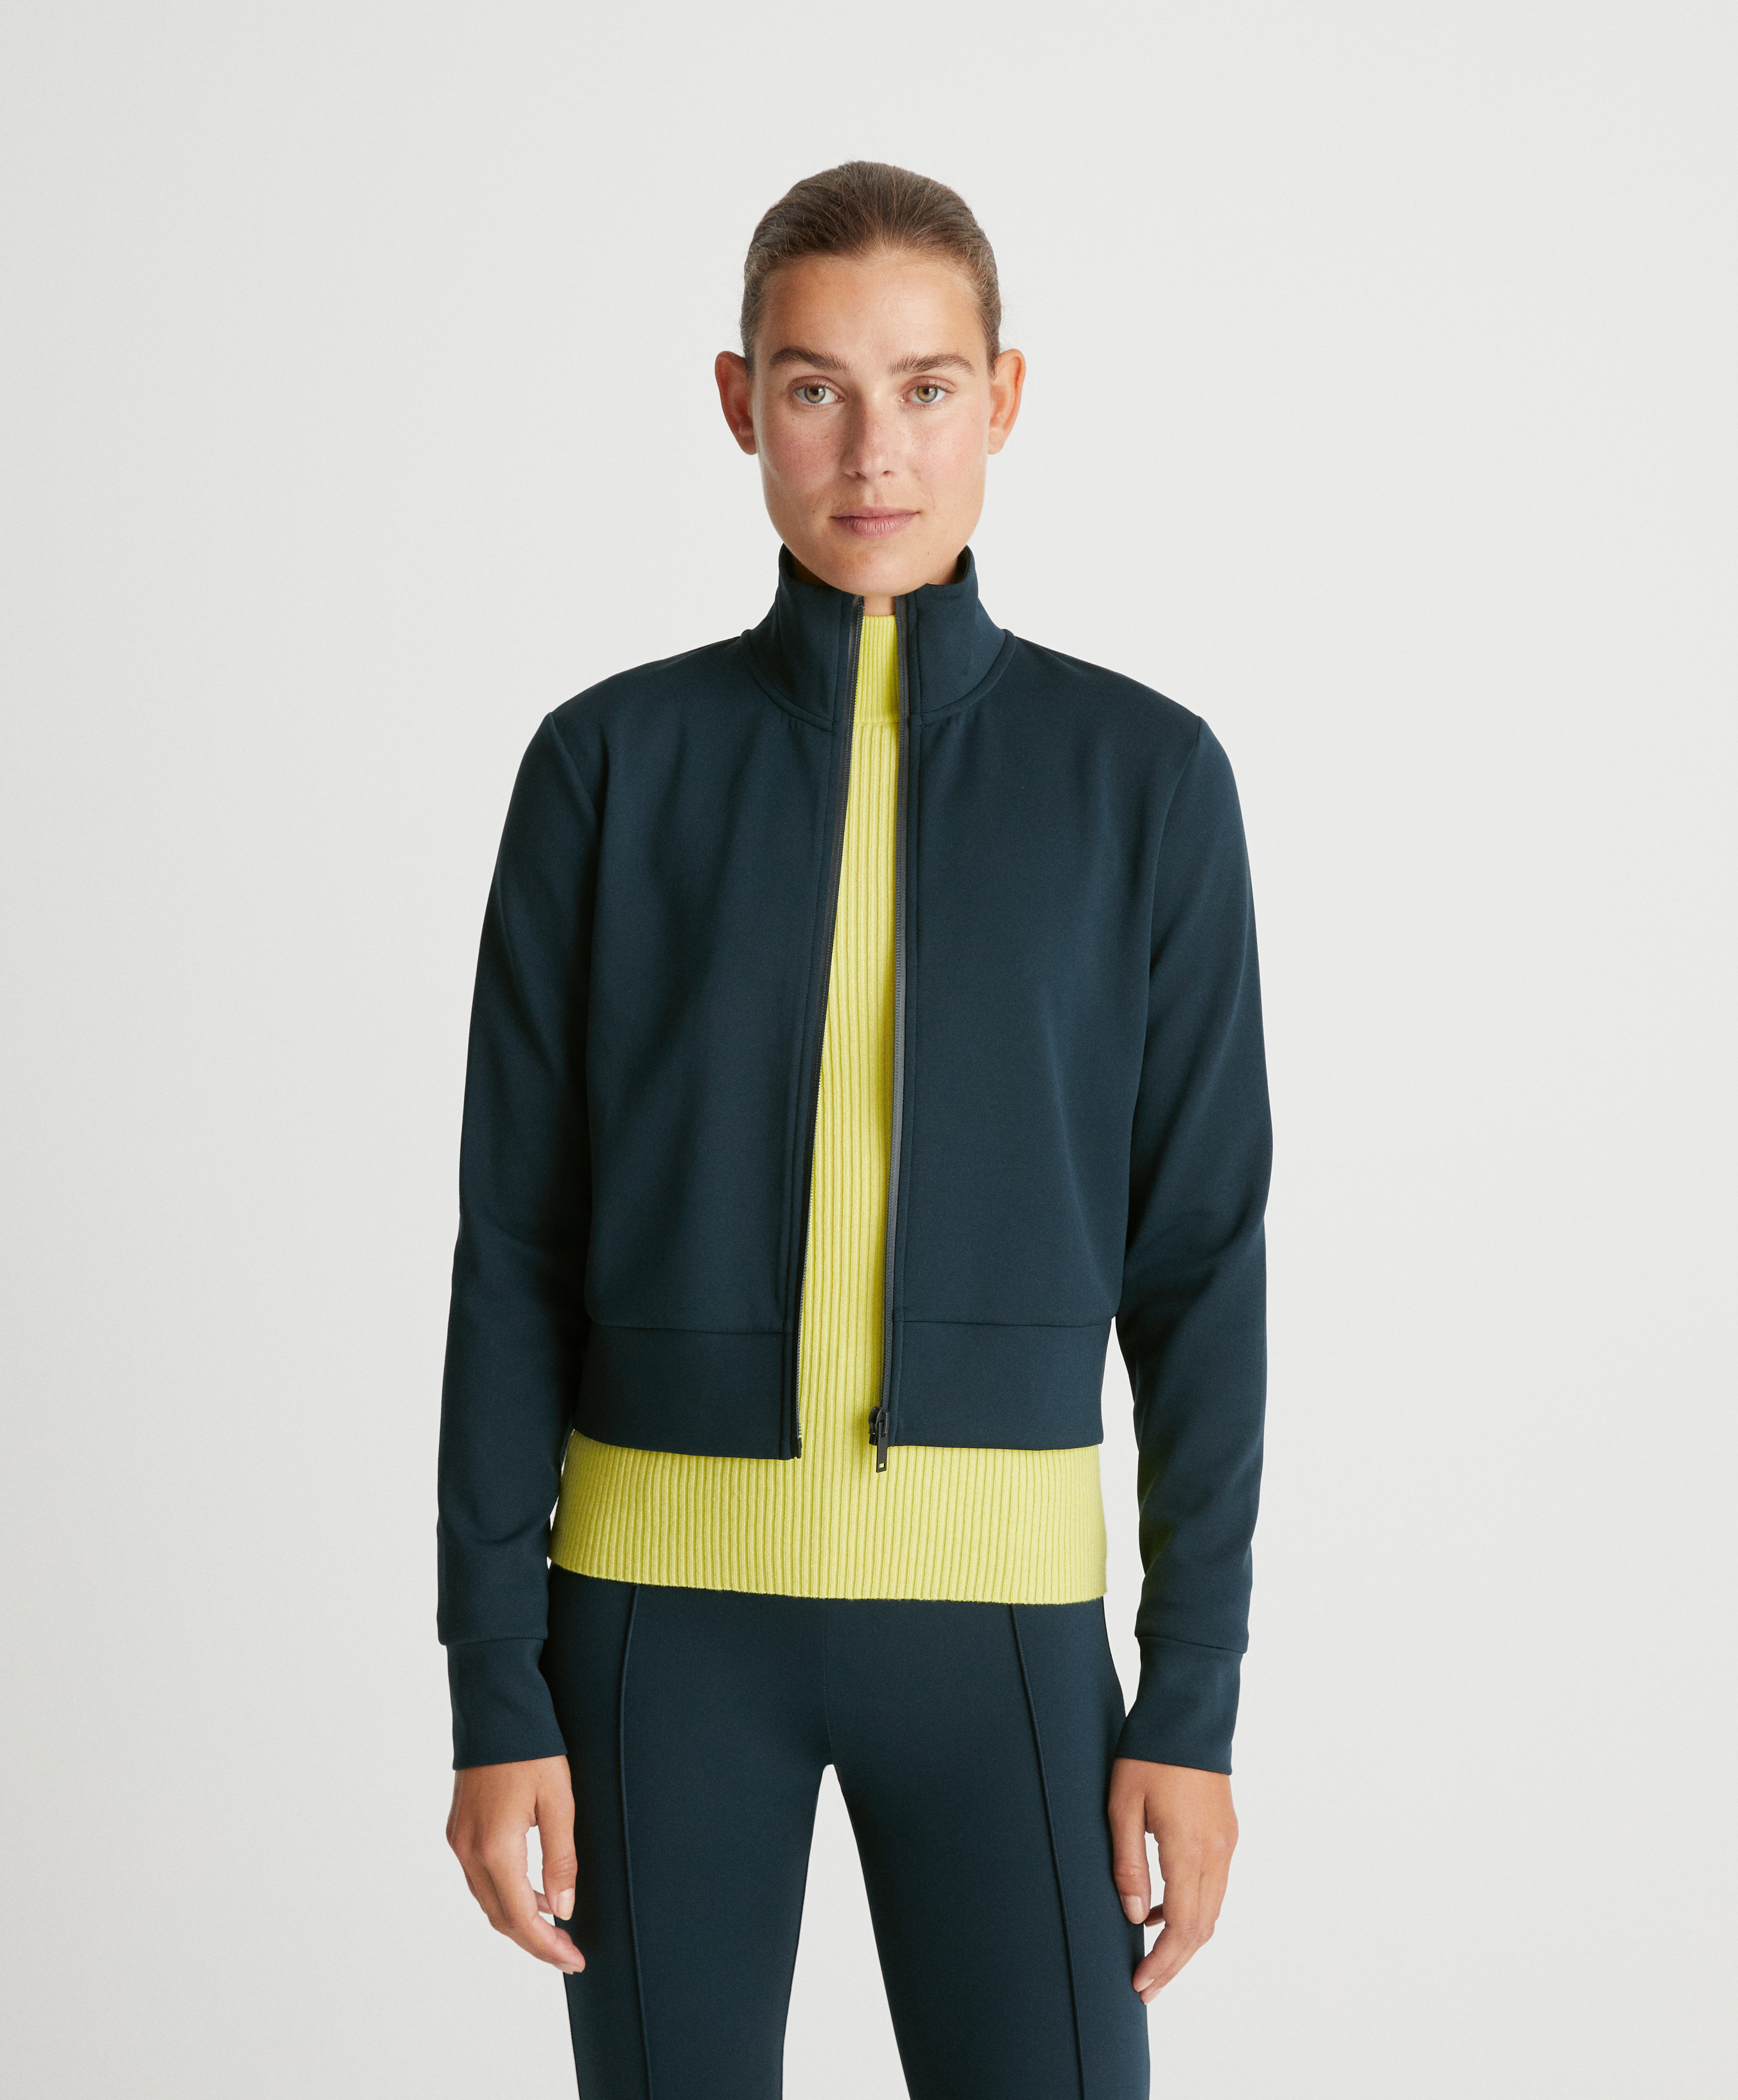 Jacket in high-strength fabric